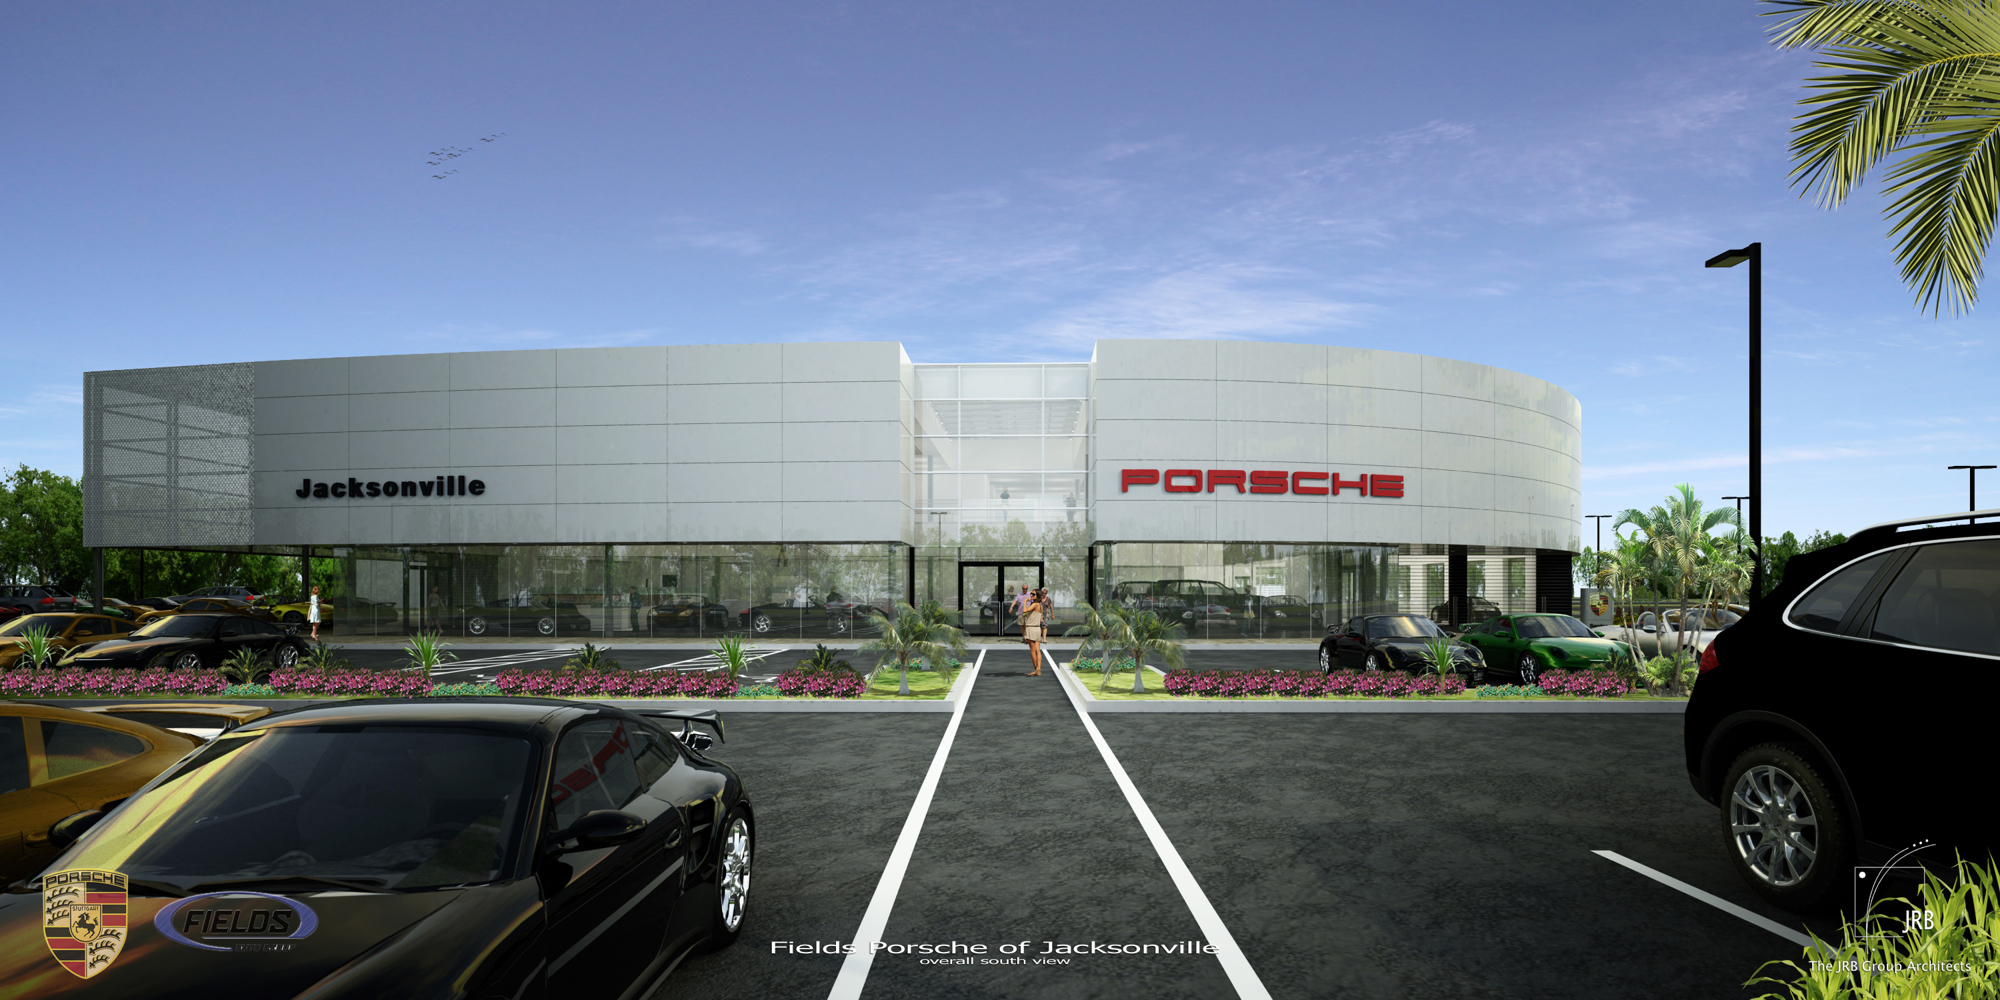 The new dealership comprises 31,648 square feet on the first floor and 9,384 square feet on the second floor.